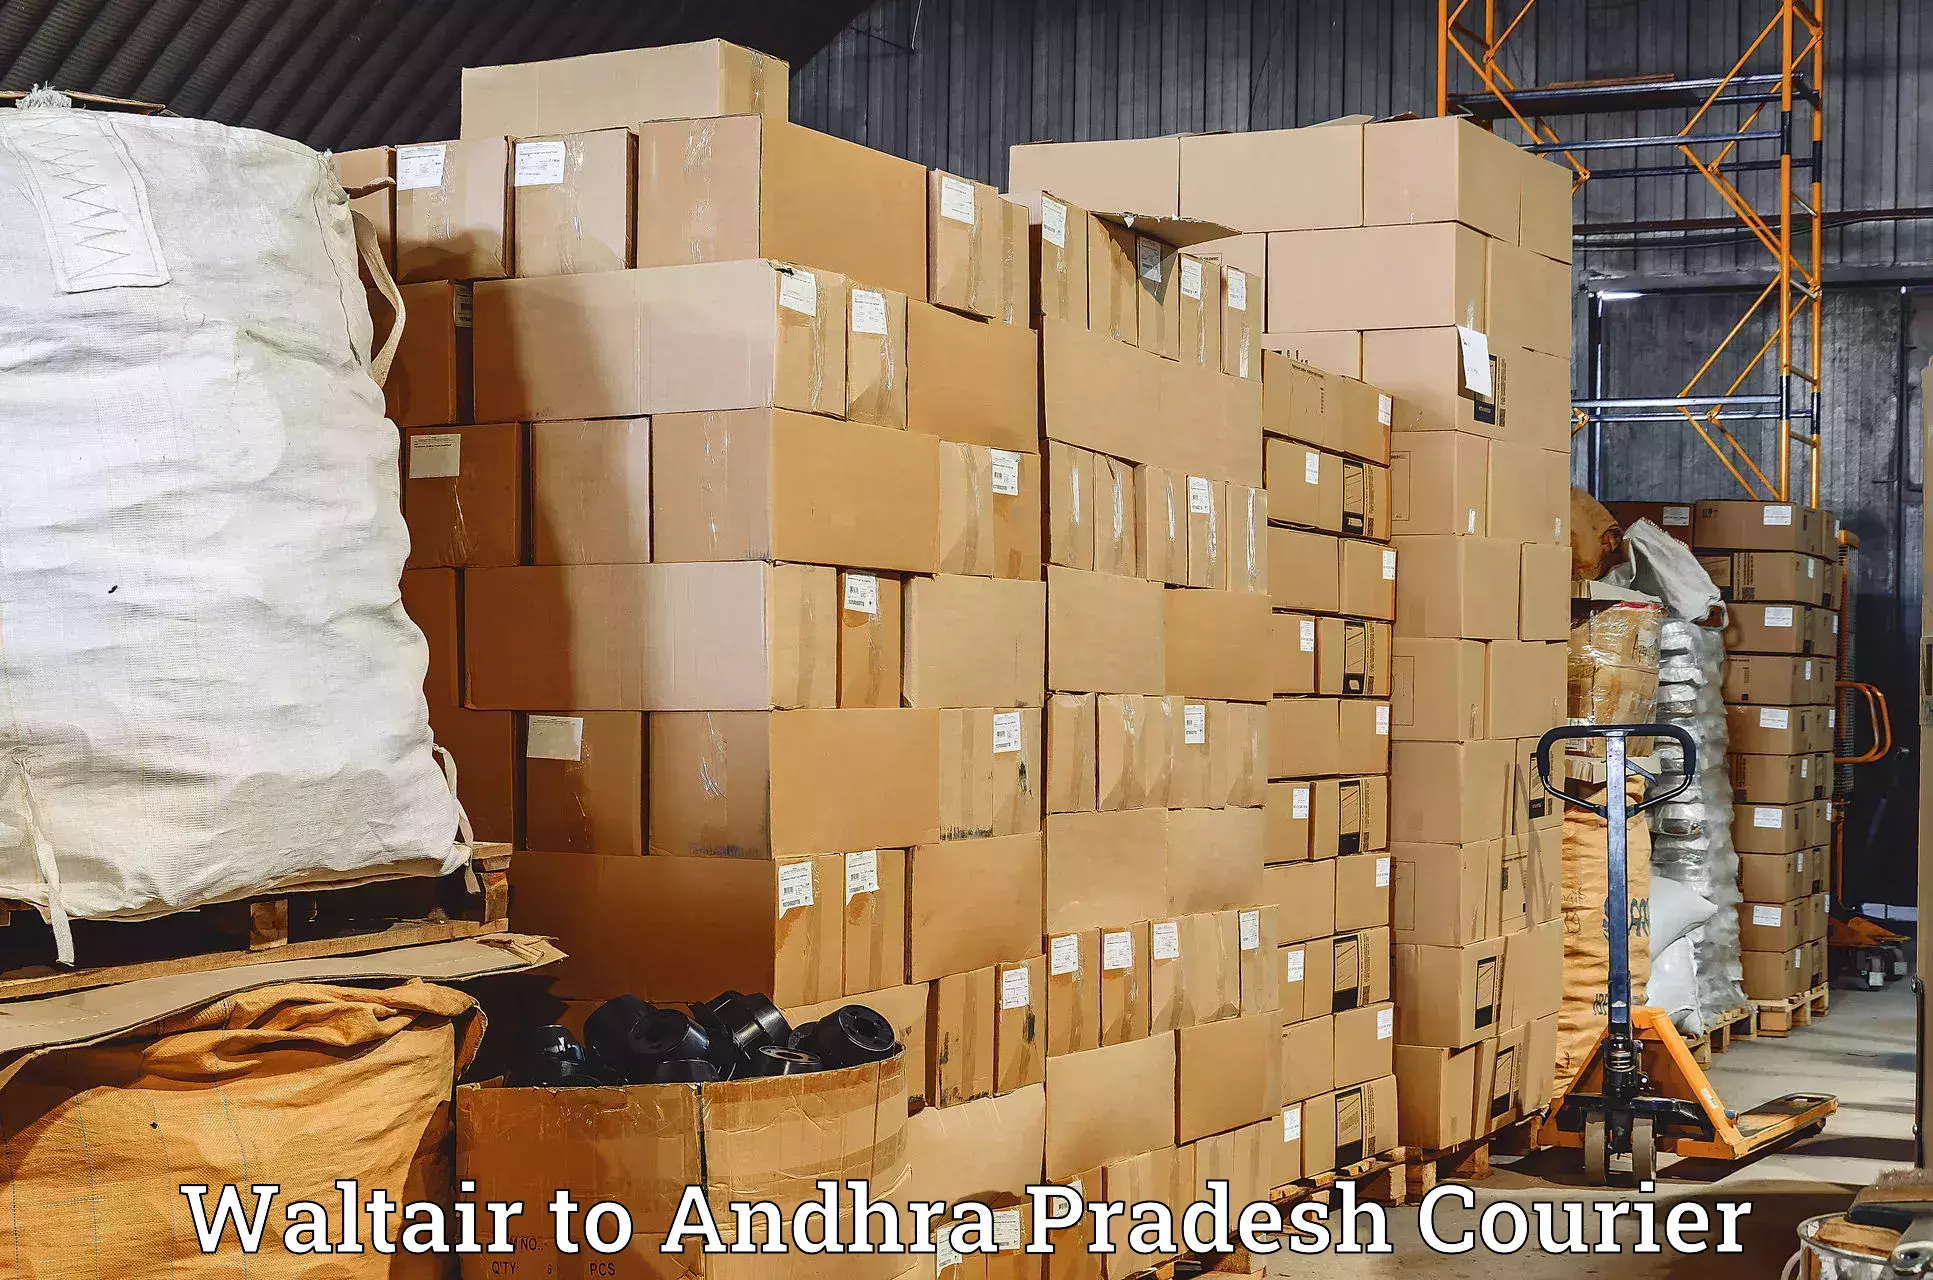 Express package delivery in Waltair to Yerravaram